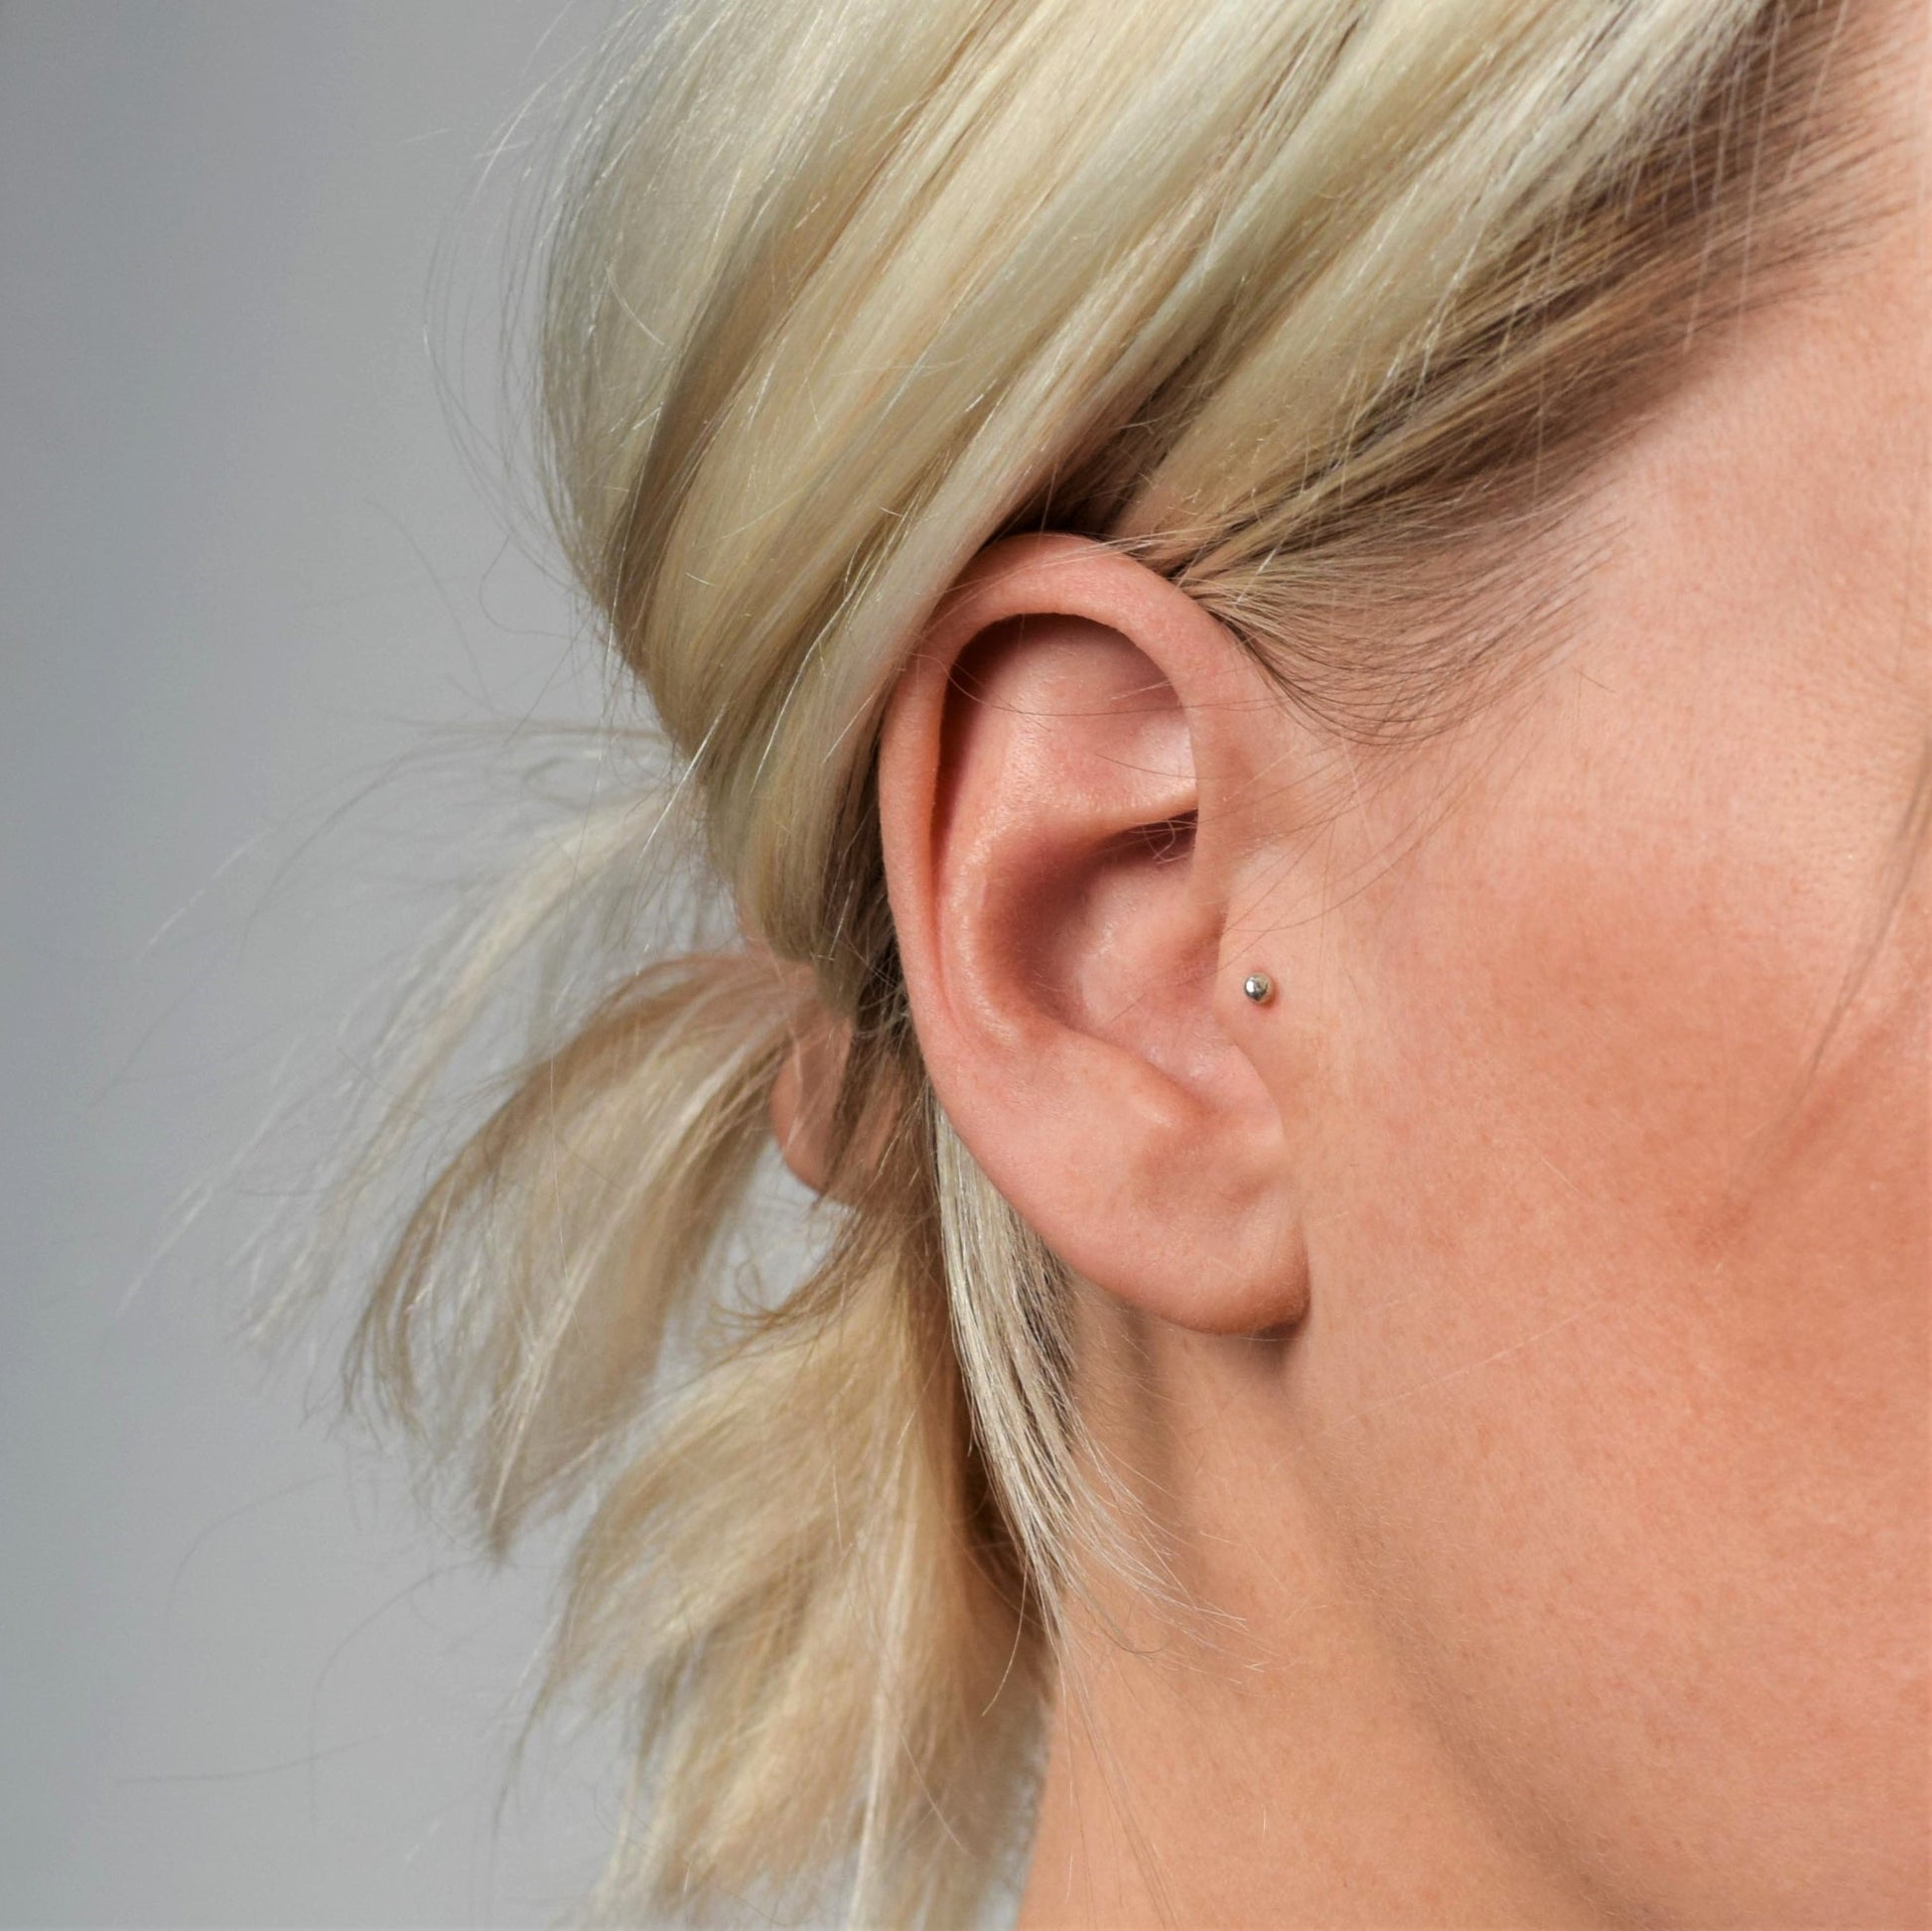 Cartilage stud worn in the tragus piercing on blond model